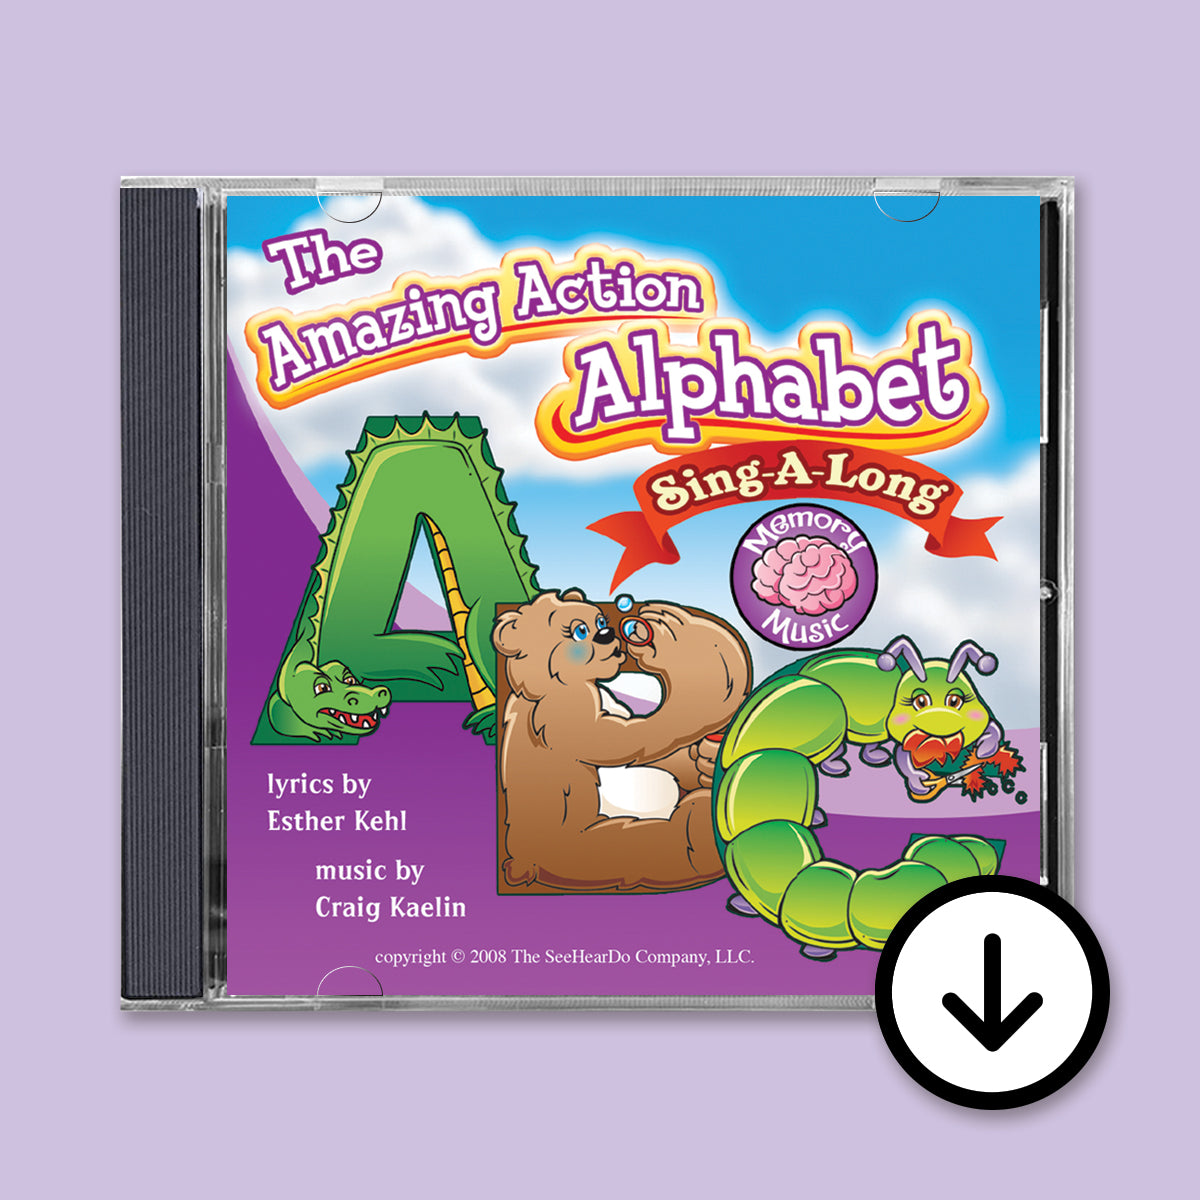 The　Action　Amazing　CD　–　Action　Sing-A-Long　Alphabet　Amazing　Alphabet